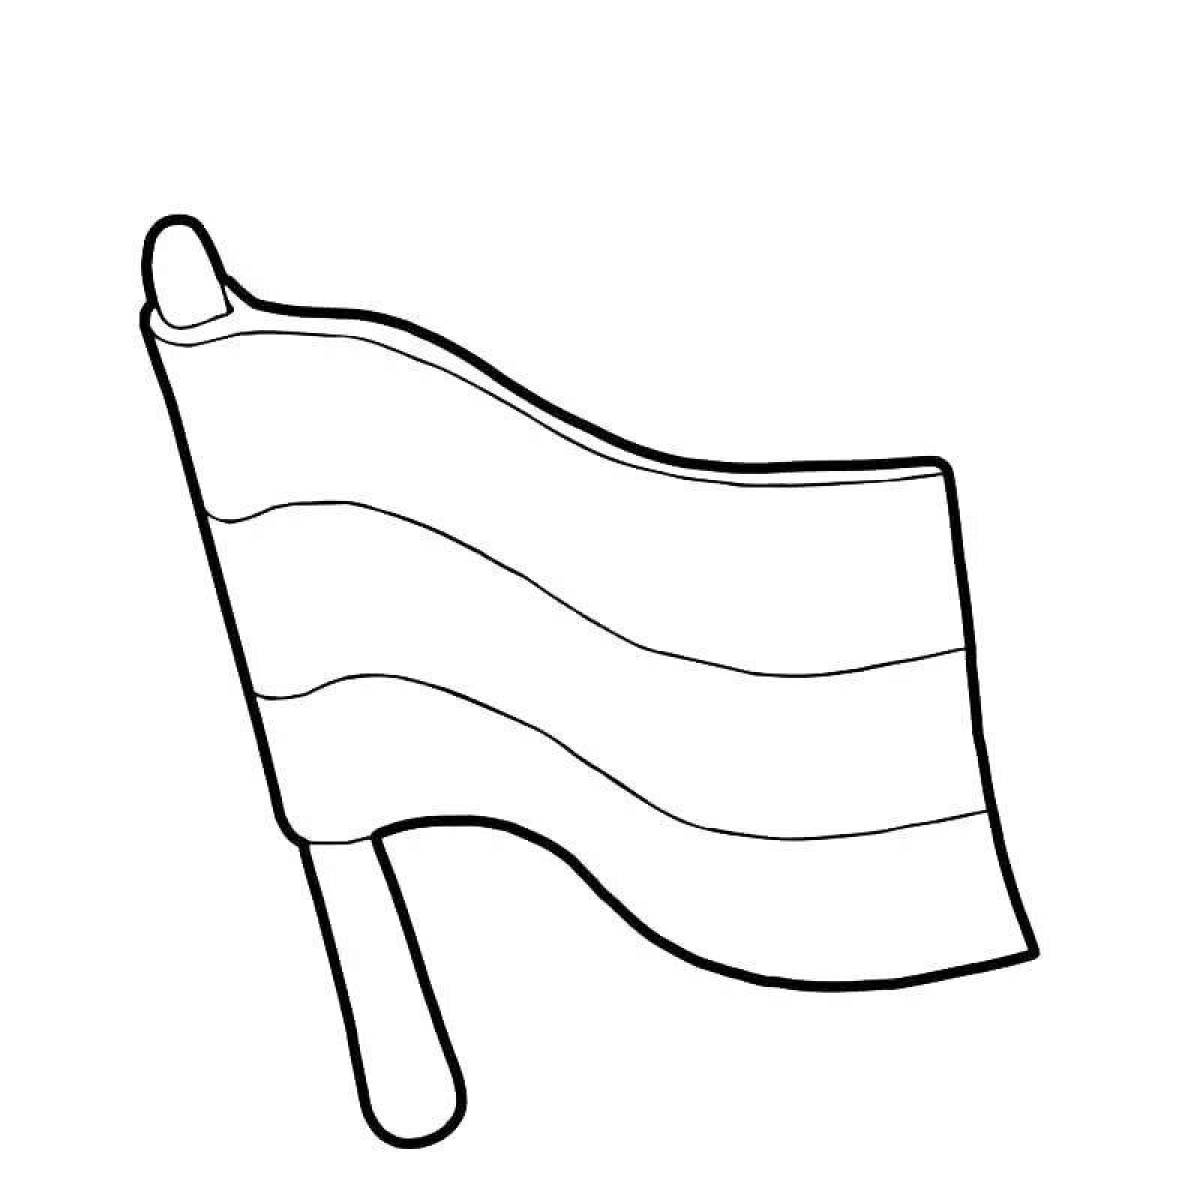 Majestic Russian flag coloring page